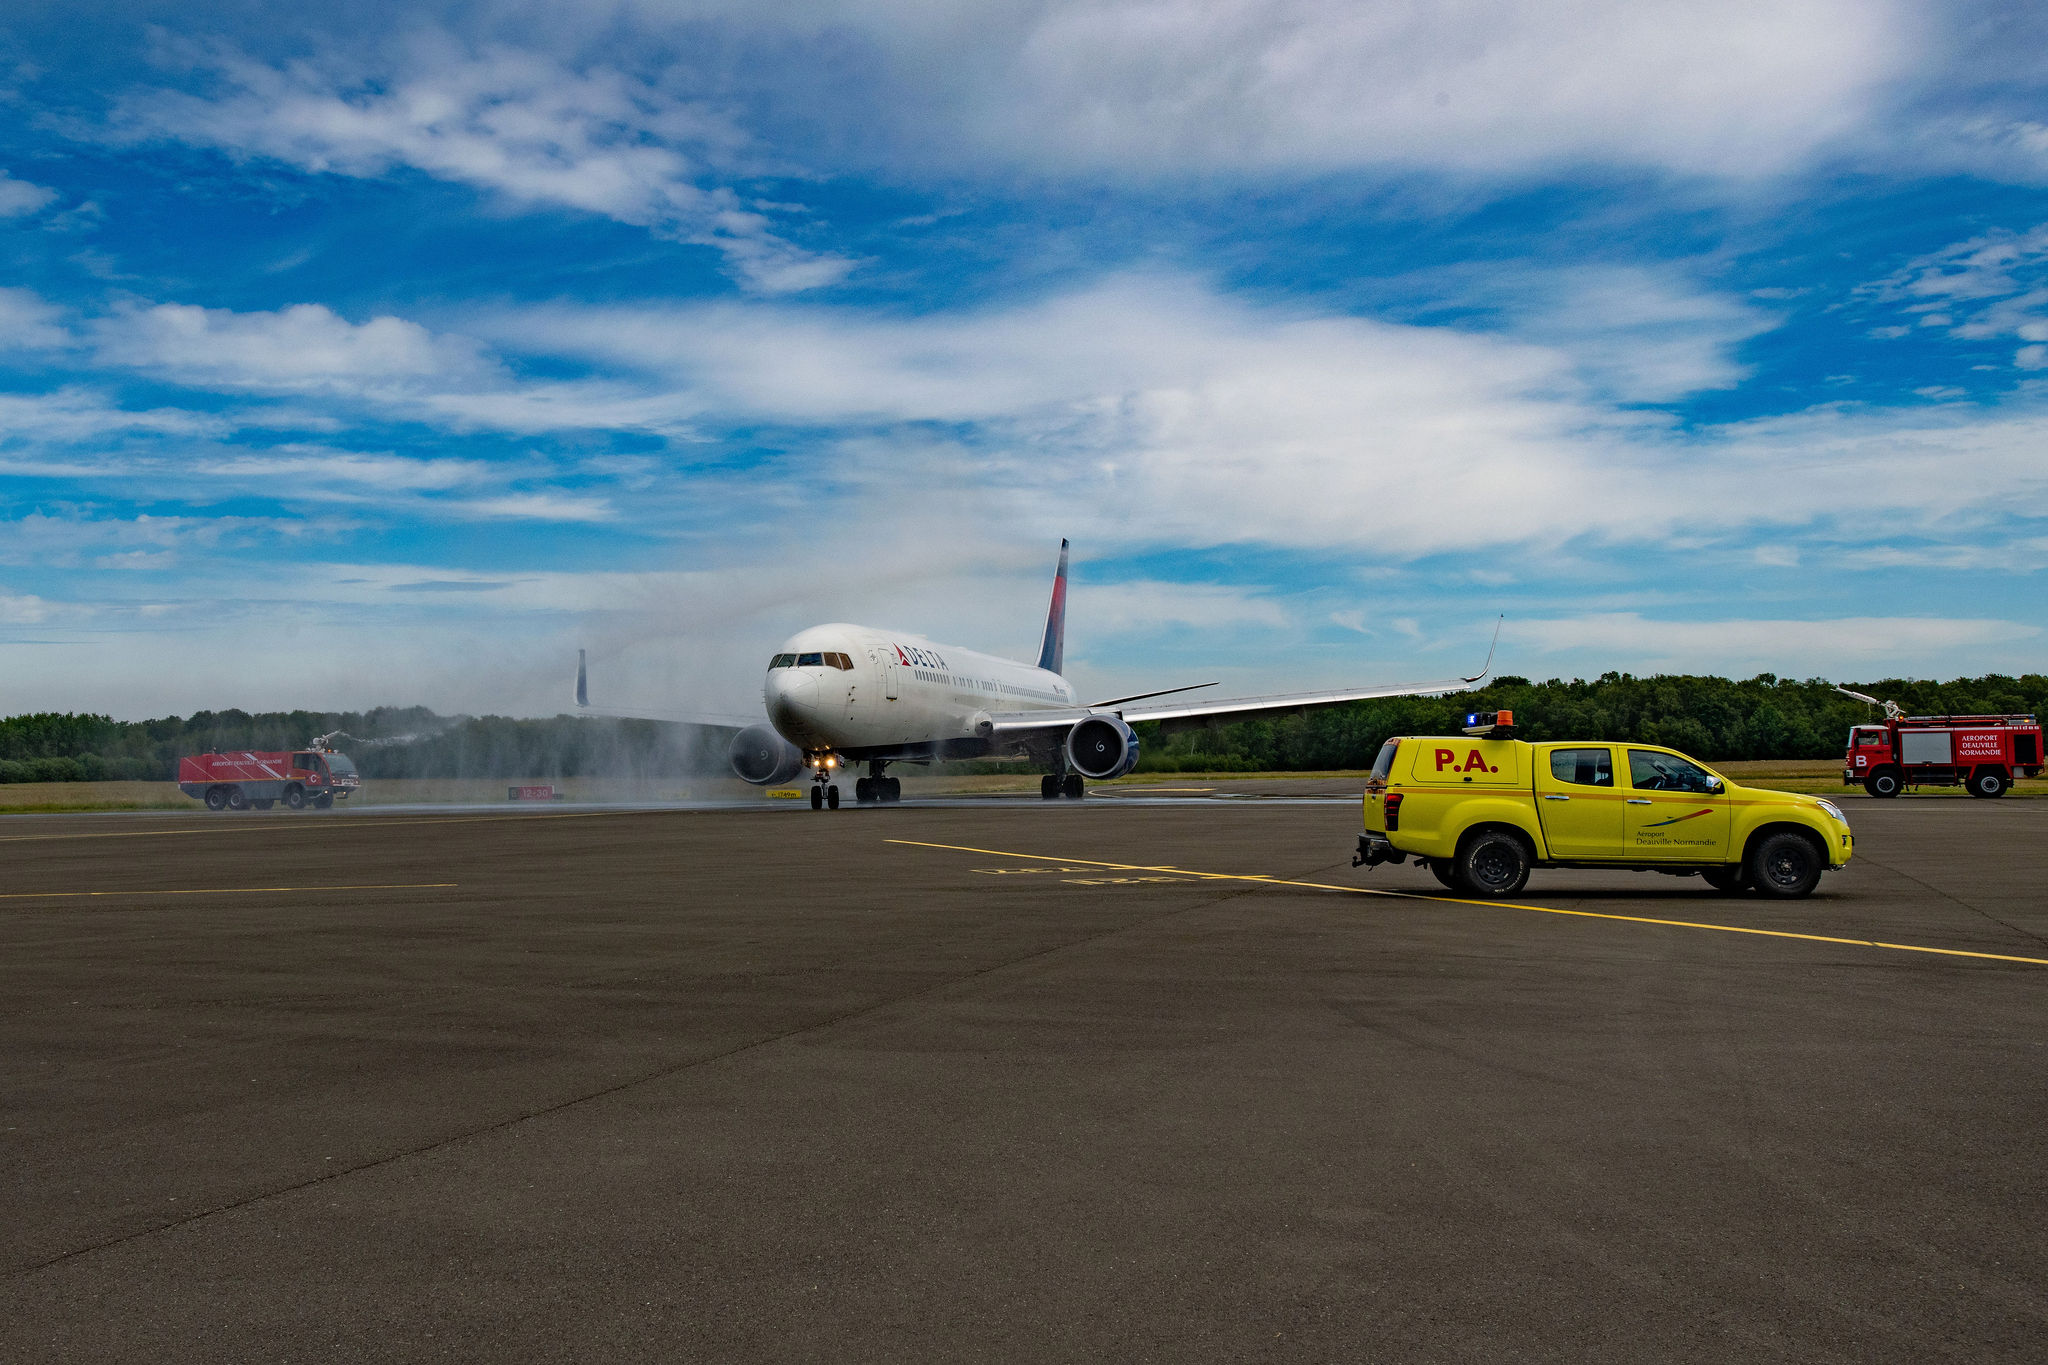 Delta makes its historic landing at DOL and is welcomed with a water cannon salute.